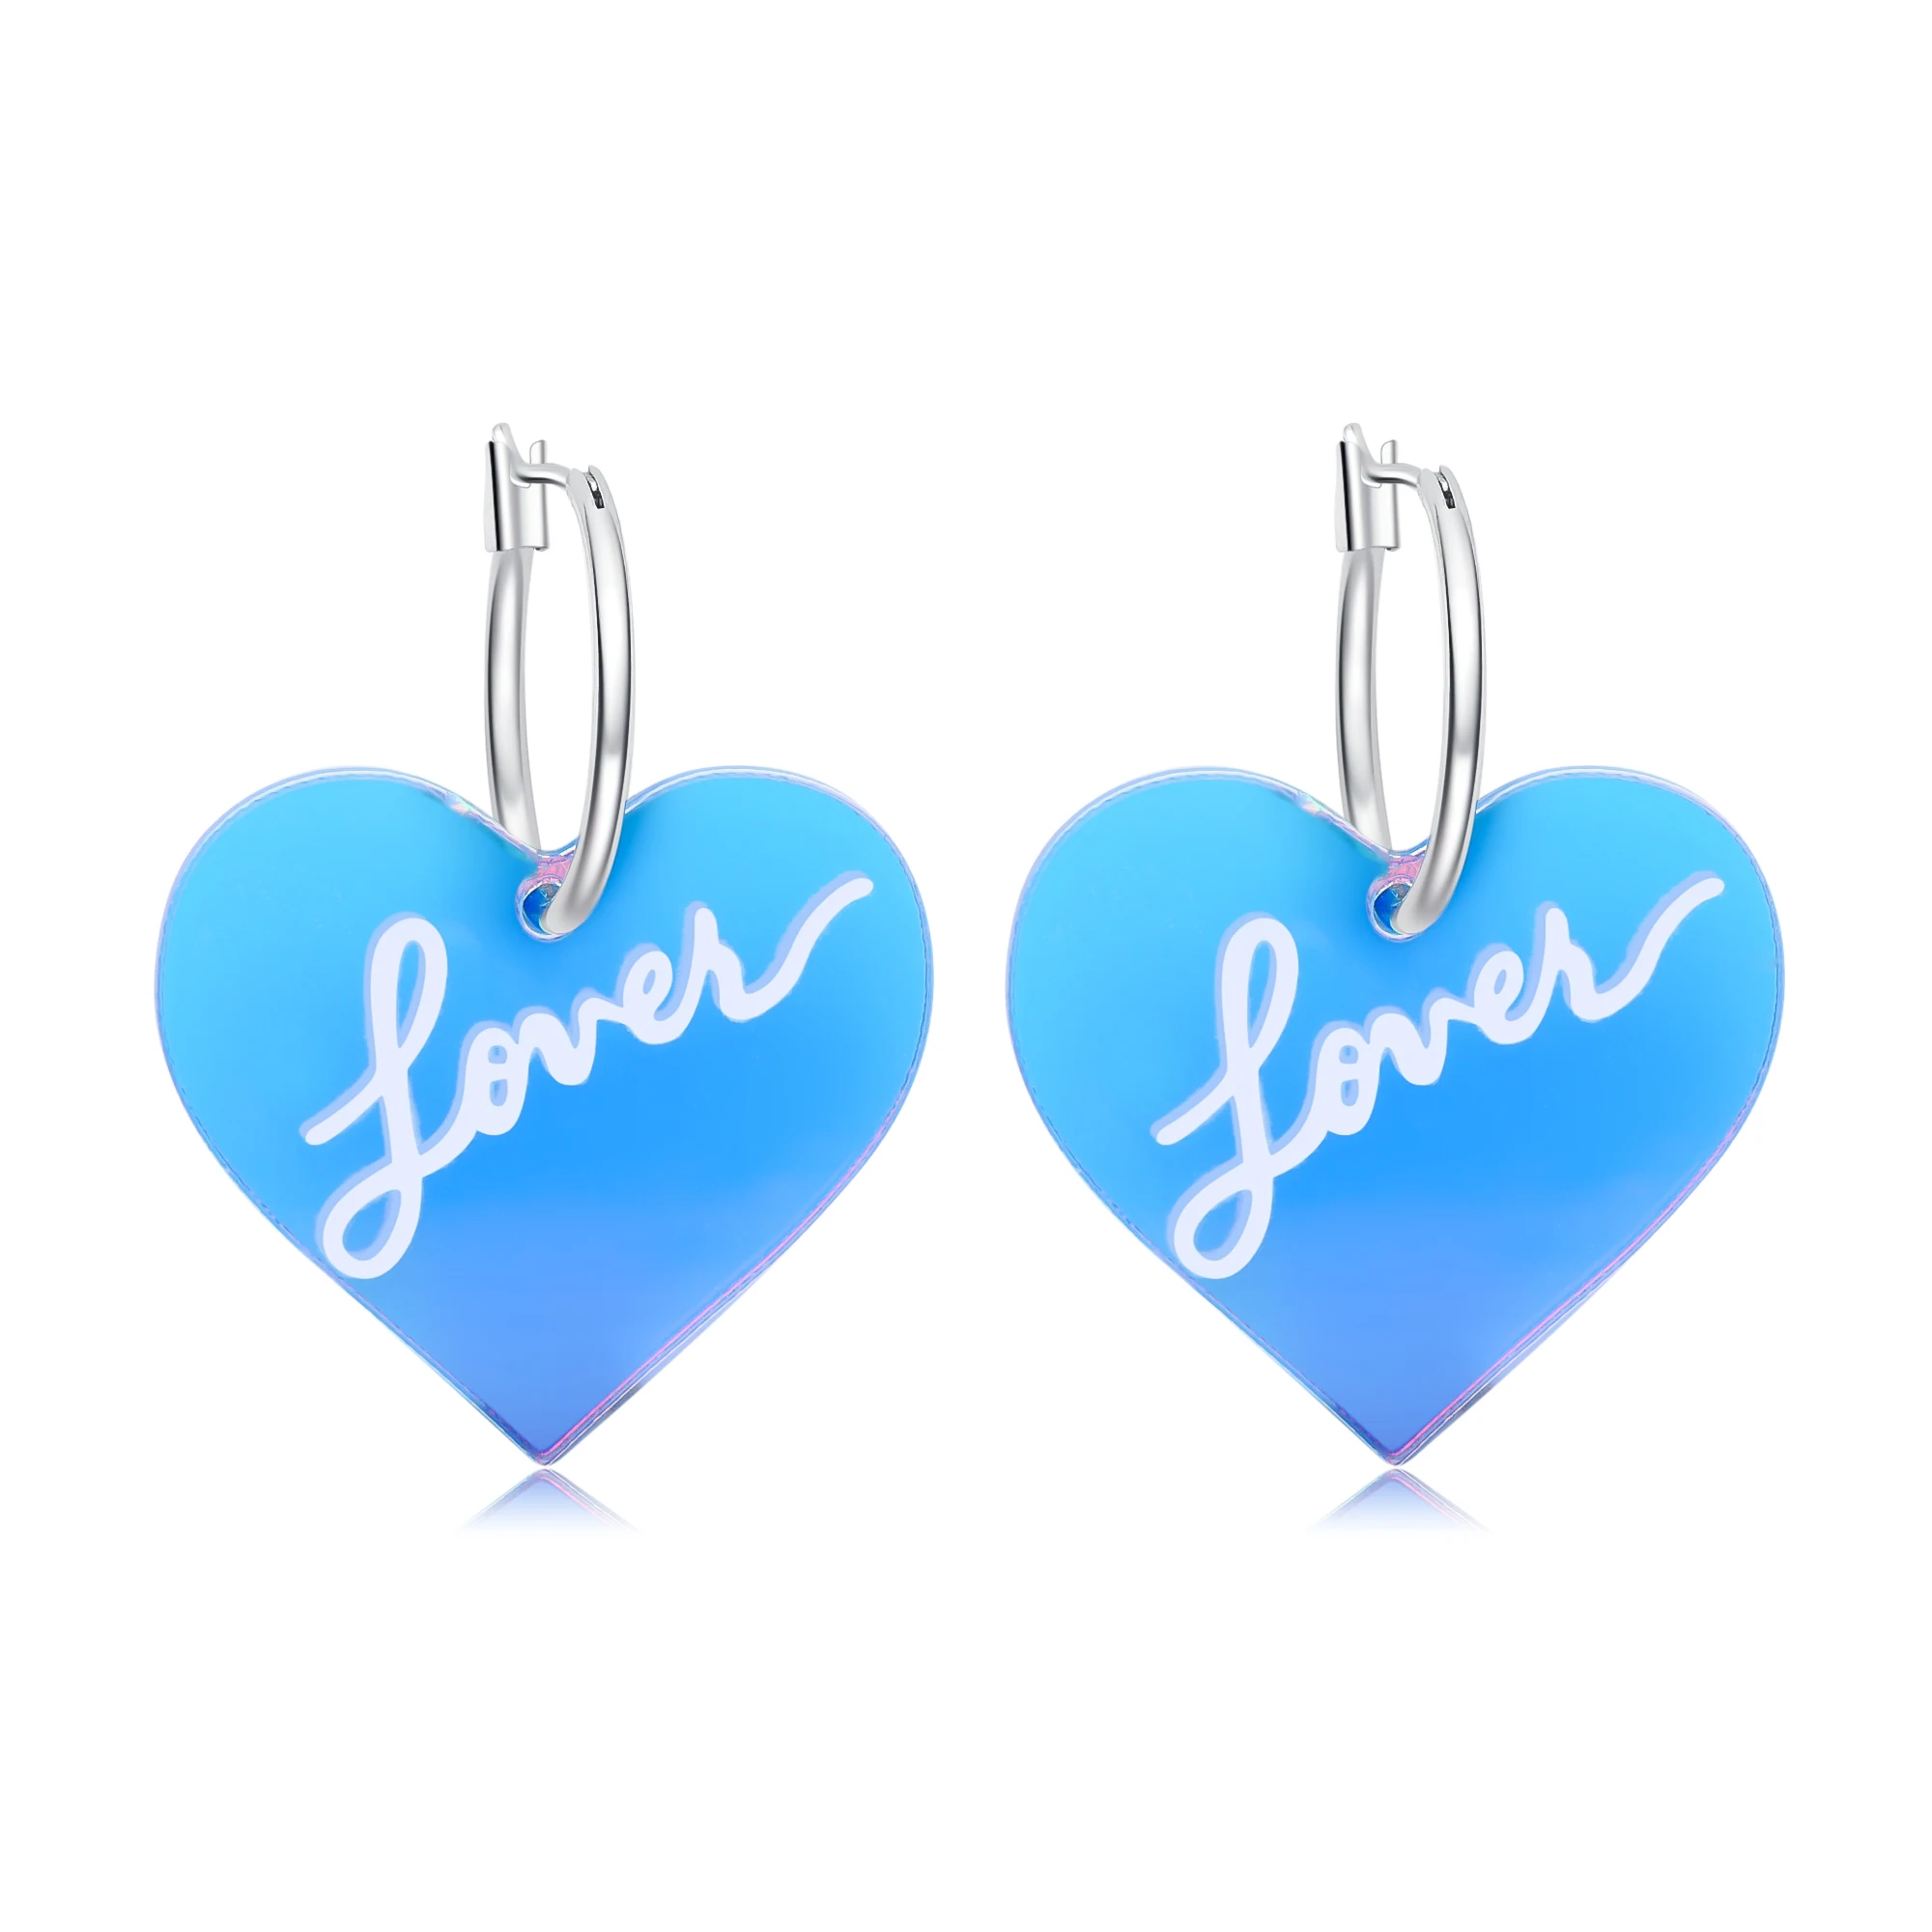 

Taylor the Swift Classic "Lover" Album Heart Hoop Earrings Acrylic Gradient Colors New the Eras Tour Jewelry for Music Fans